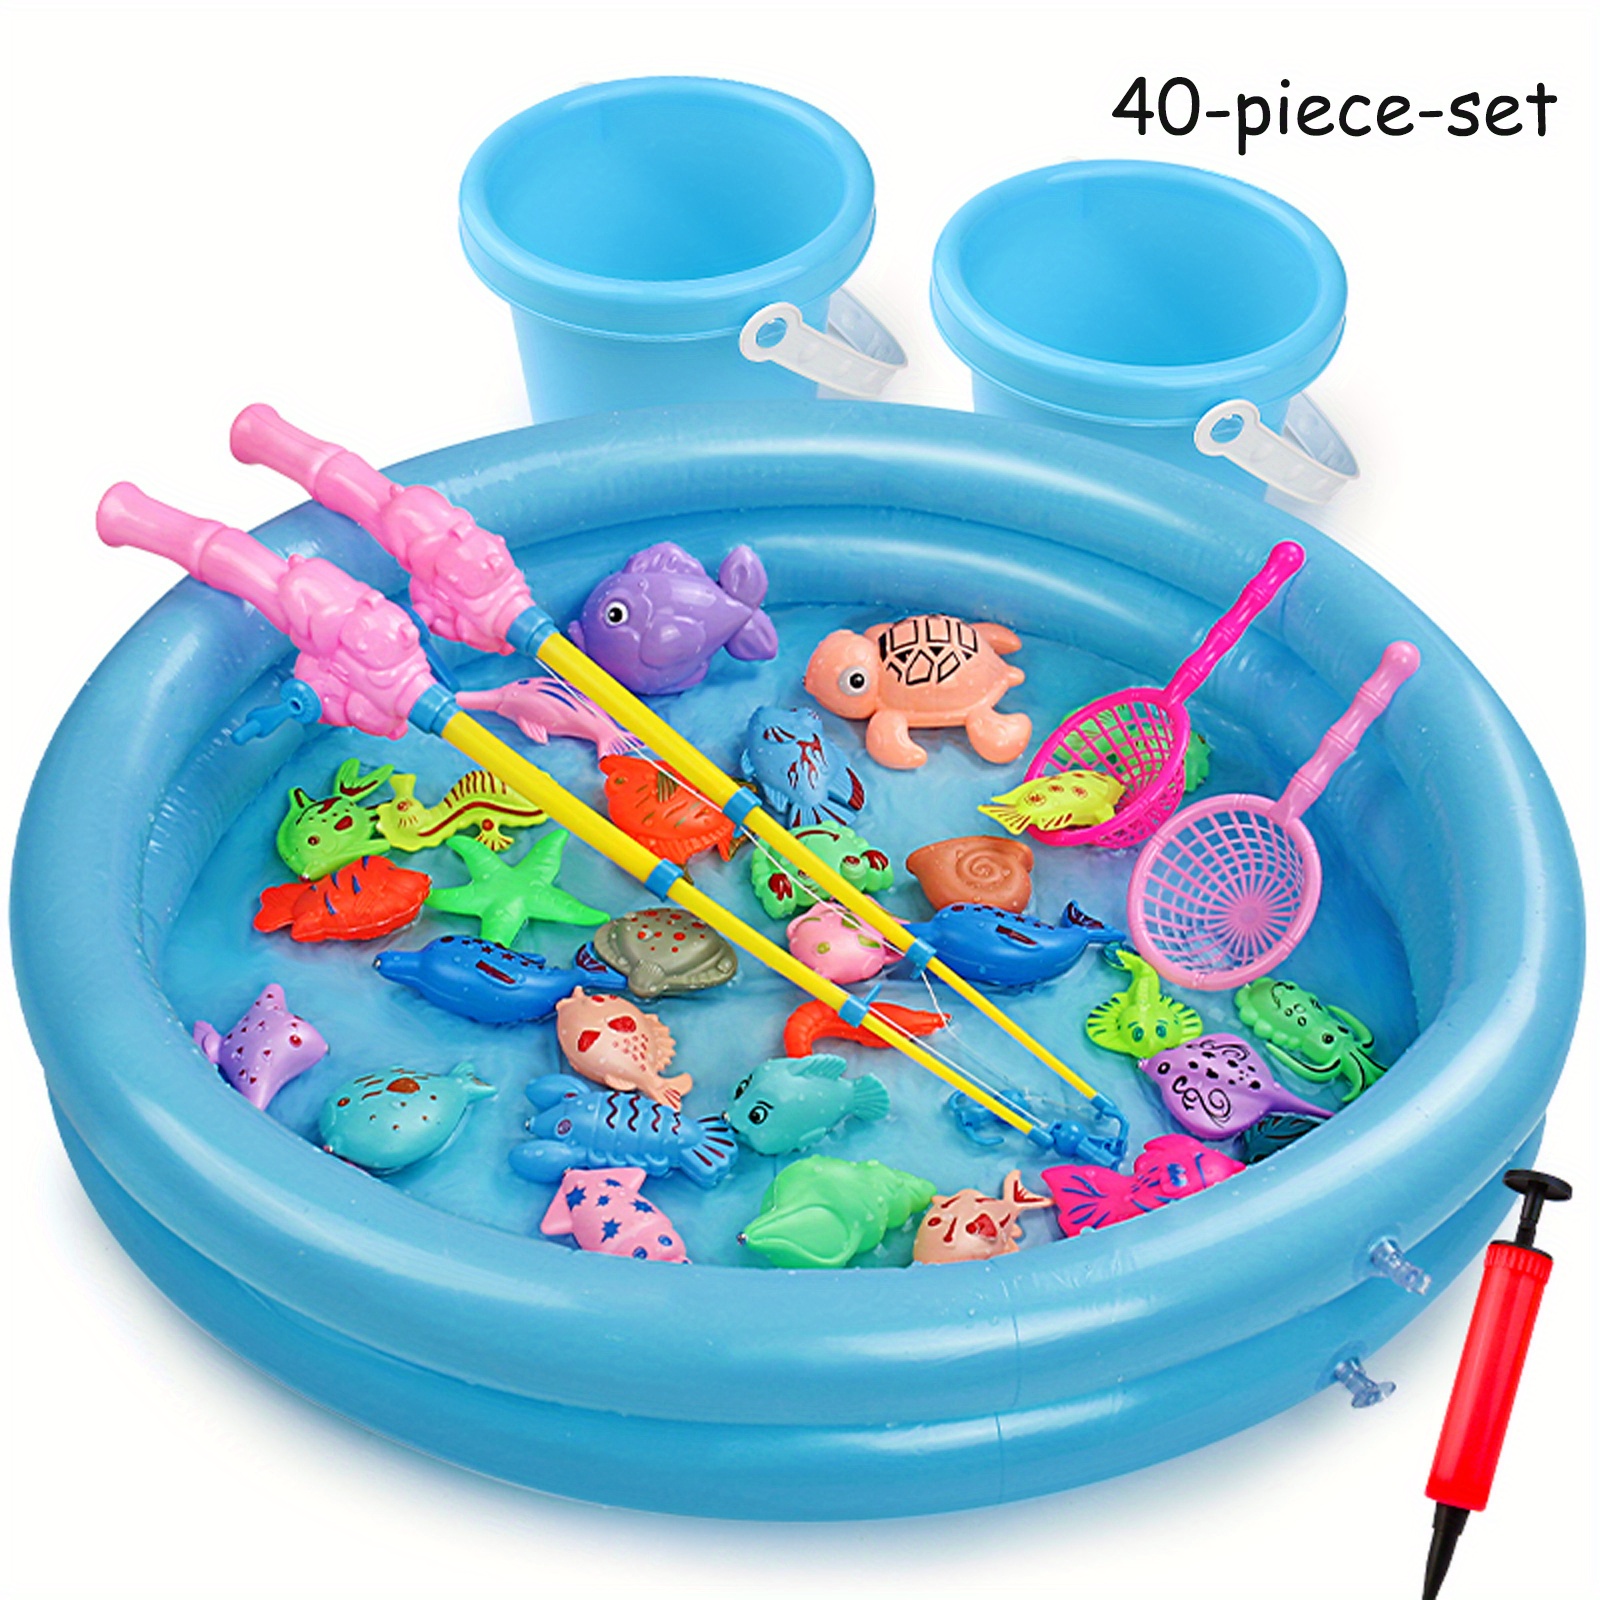  Carevon Magnetic Fishing Toys for Kids Ages 4-8, Fishing Game  Pool Toys for Kiddie Pool 3-4 Yeas, 40pcs Floating Bath Fishing Toys for  Bathtub Fun : Toys & Games